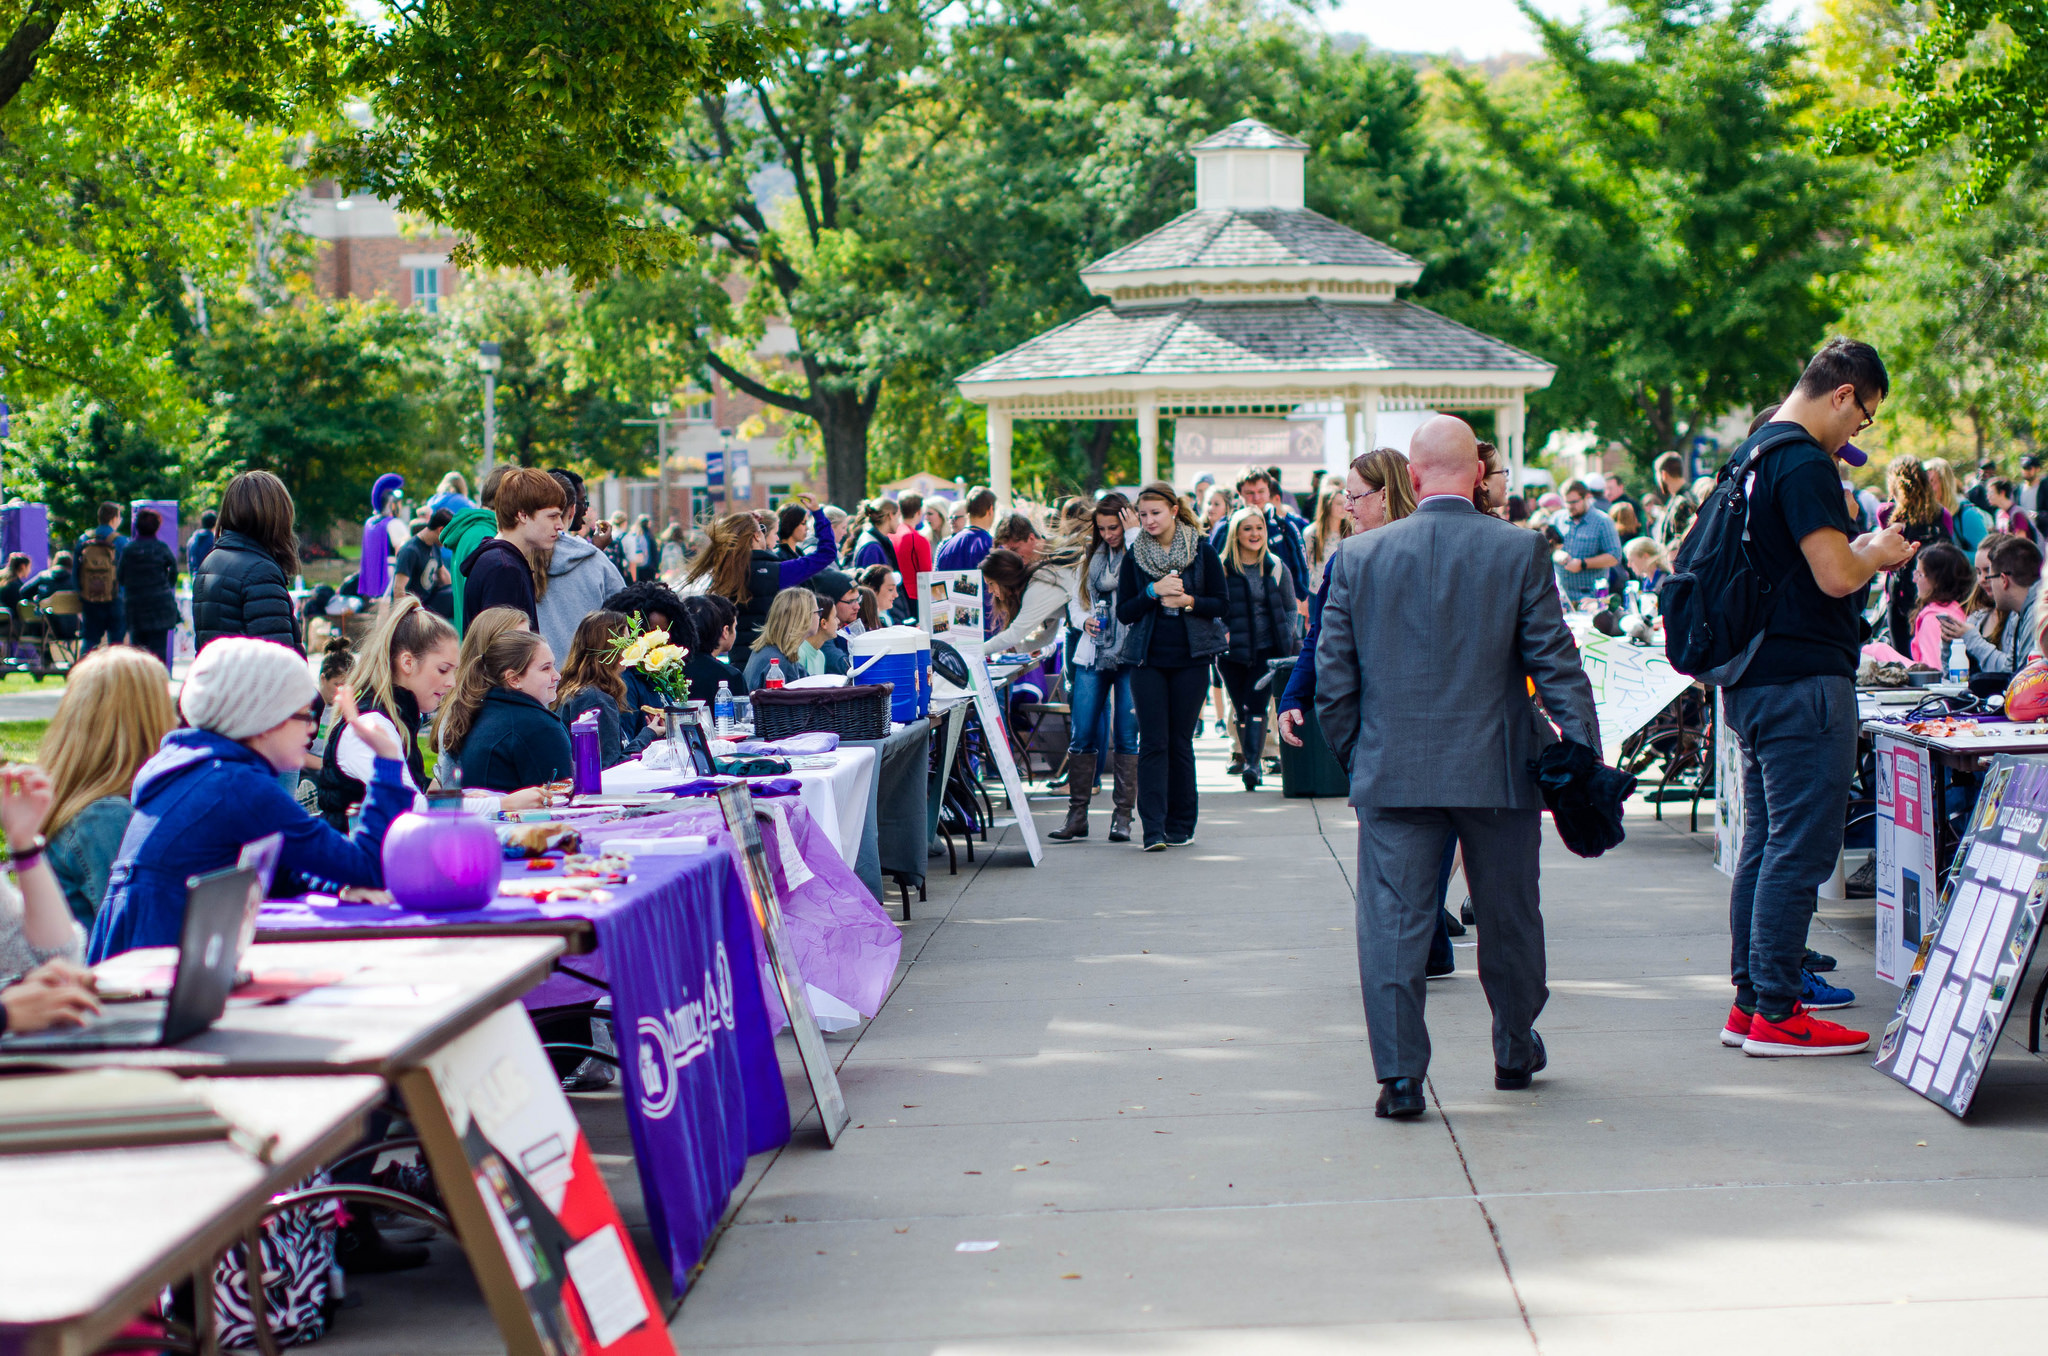 Students perusing around a club fair in the courtyard on campus.